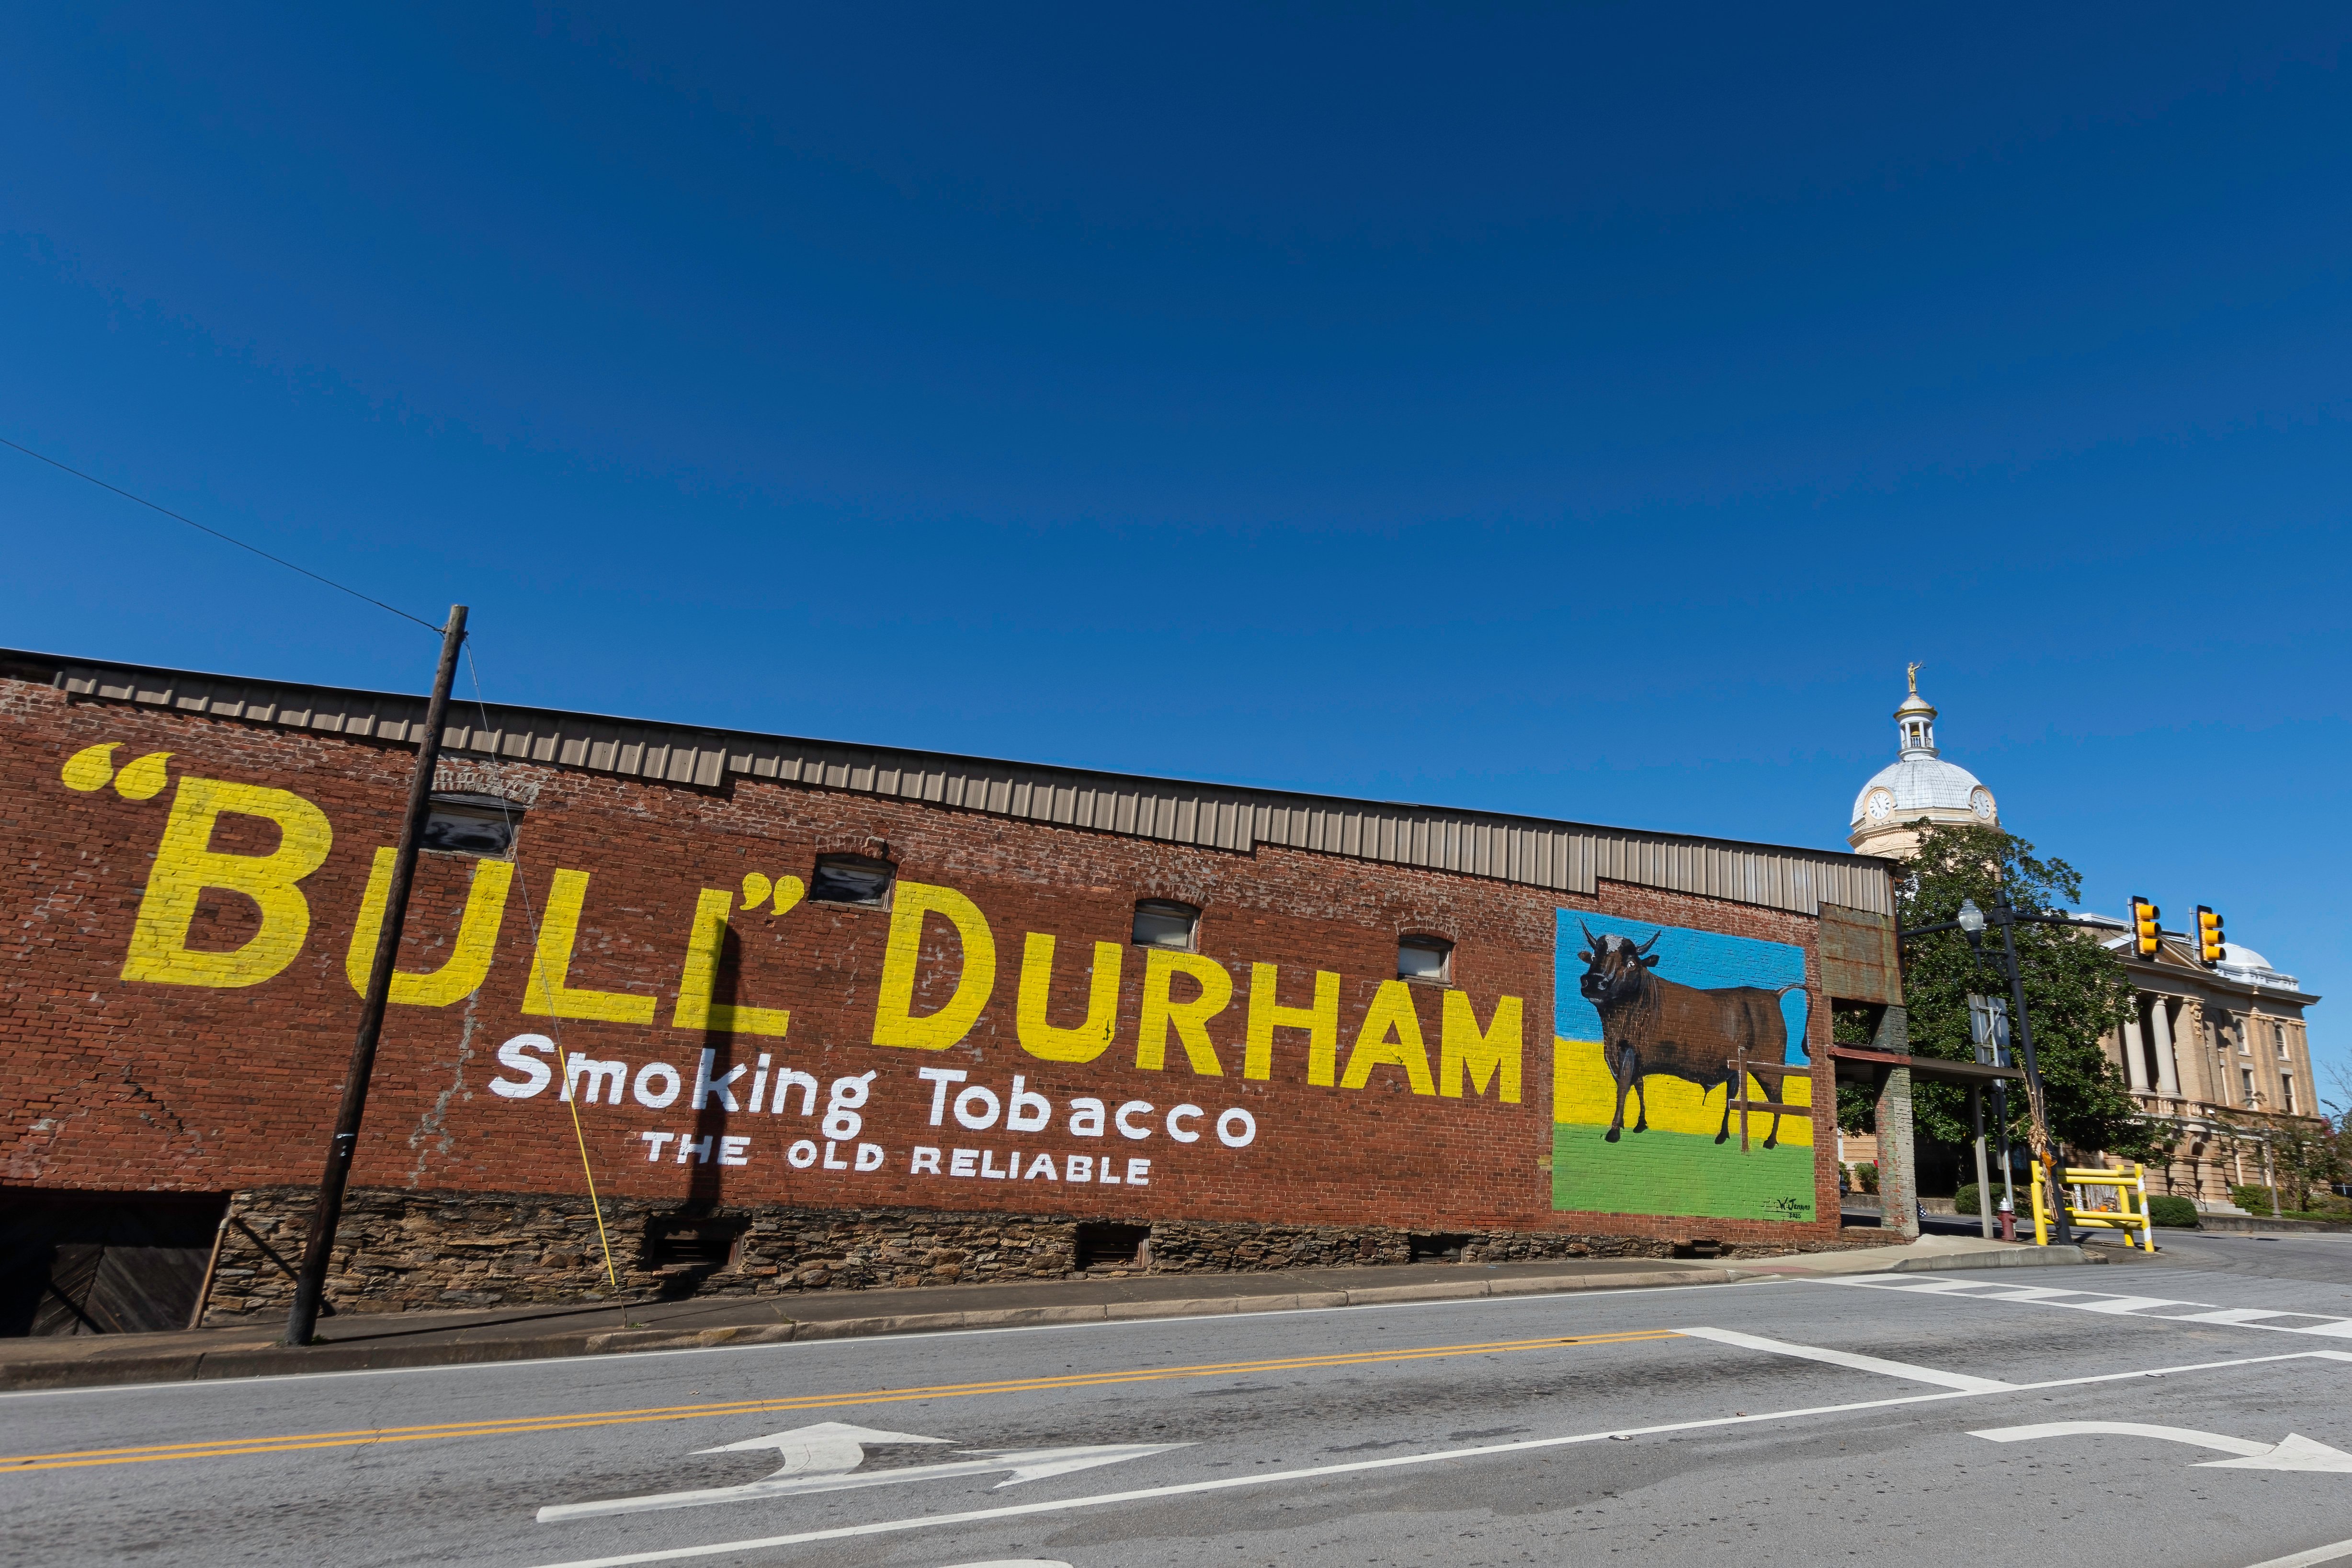 Bull Durham Quote on the site of a building